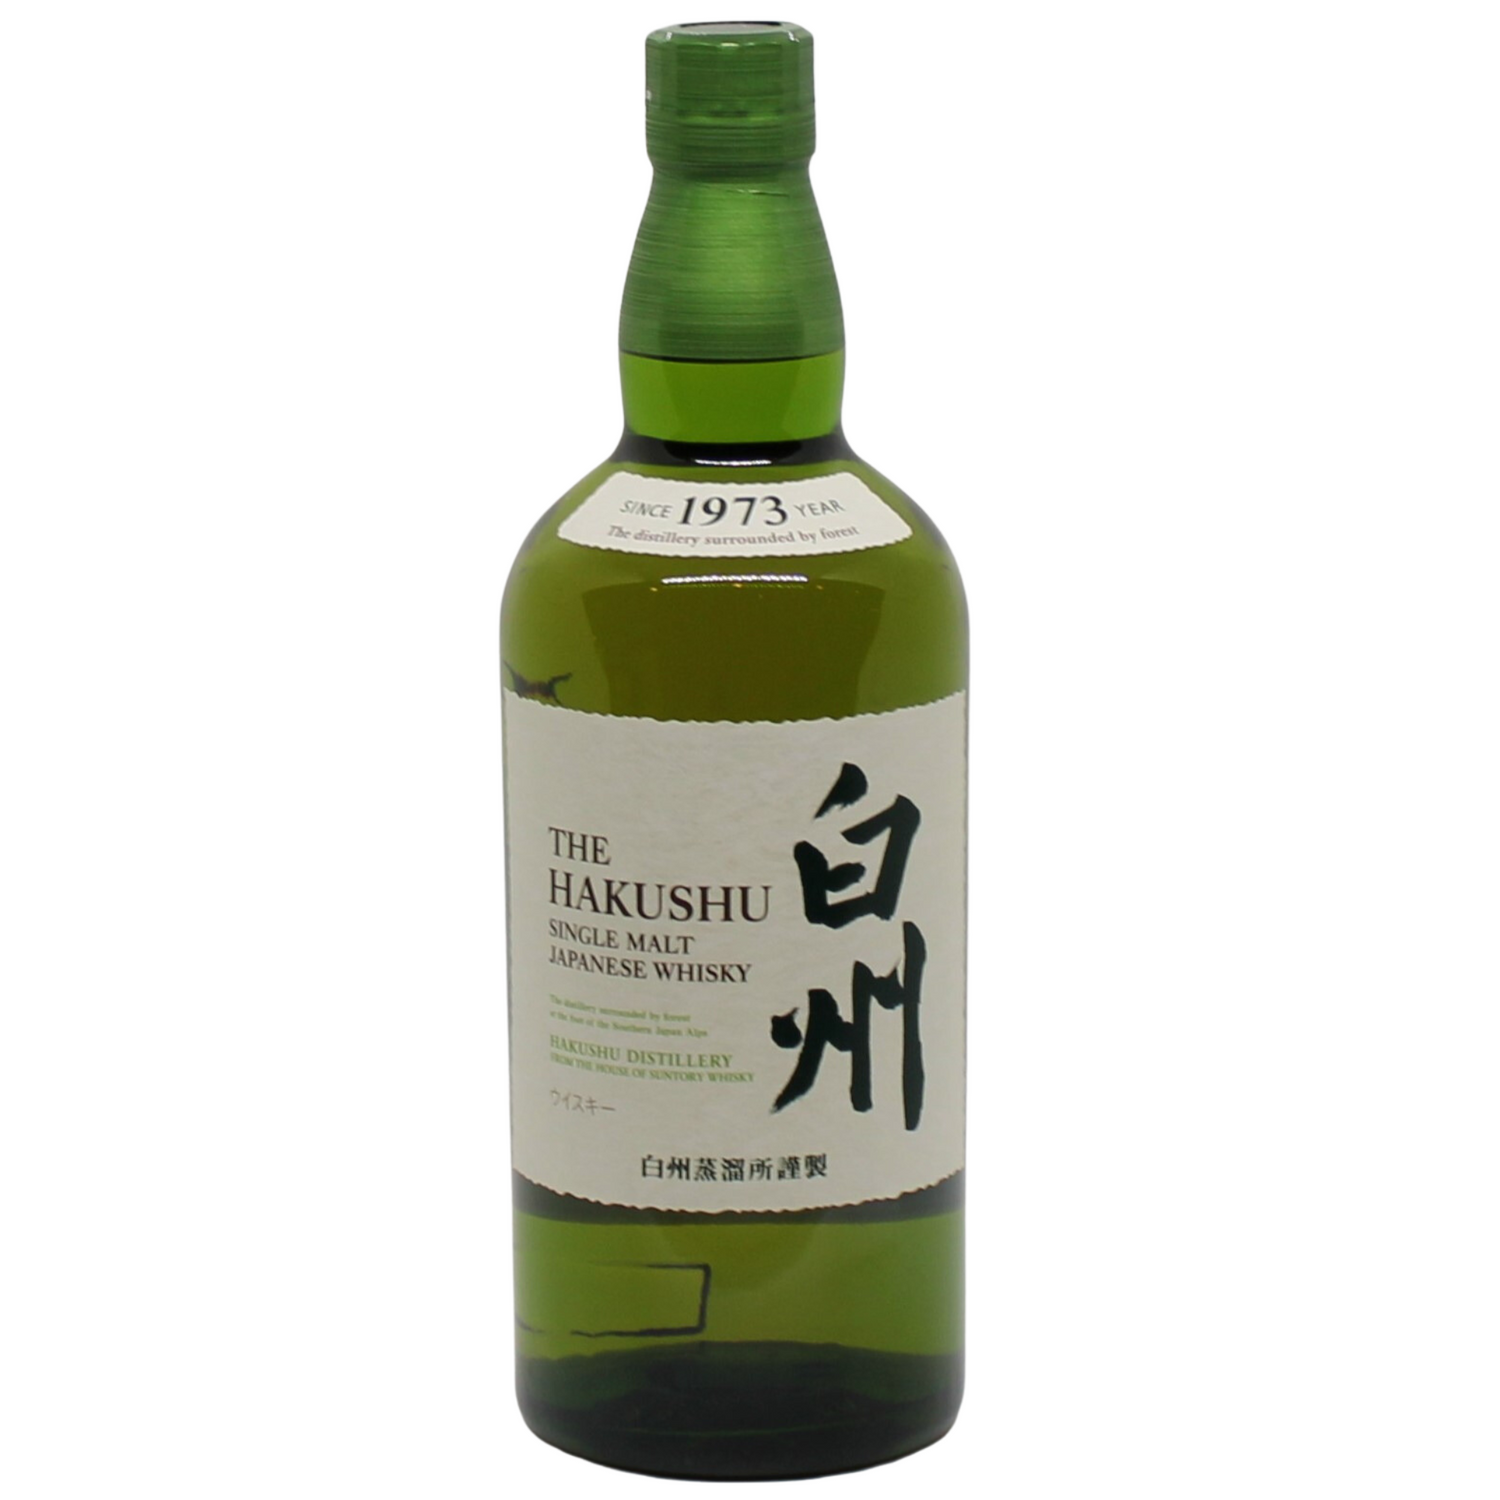 The peated single malt Whisky from the house of Suntory.